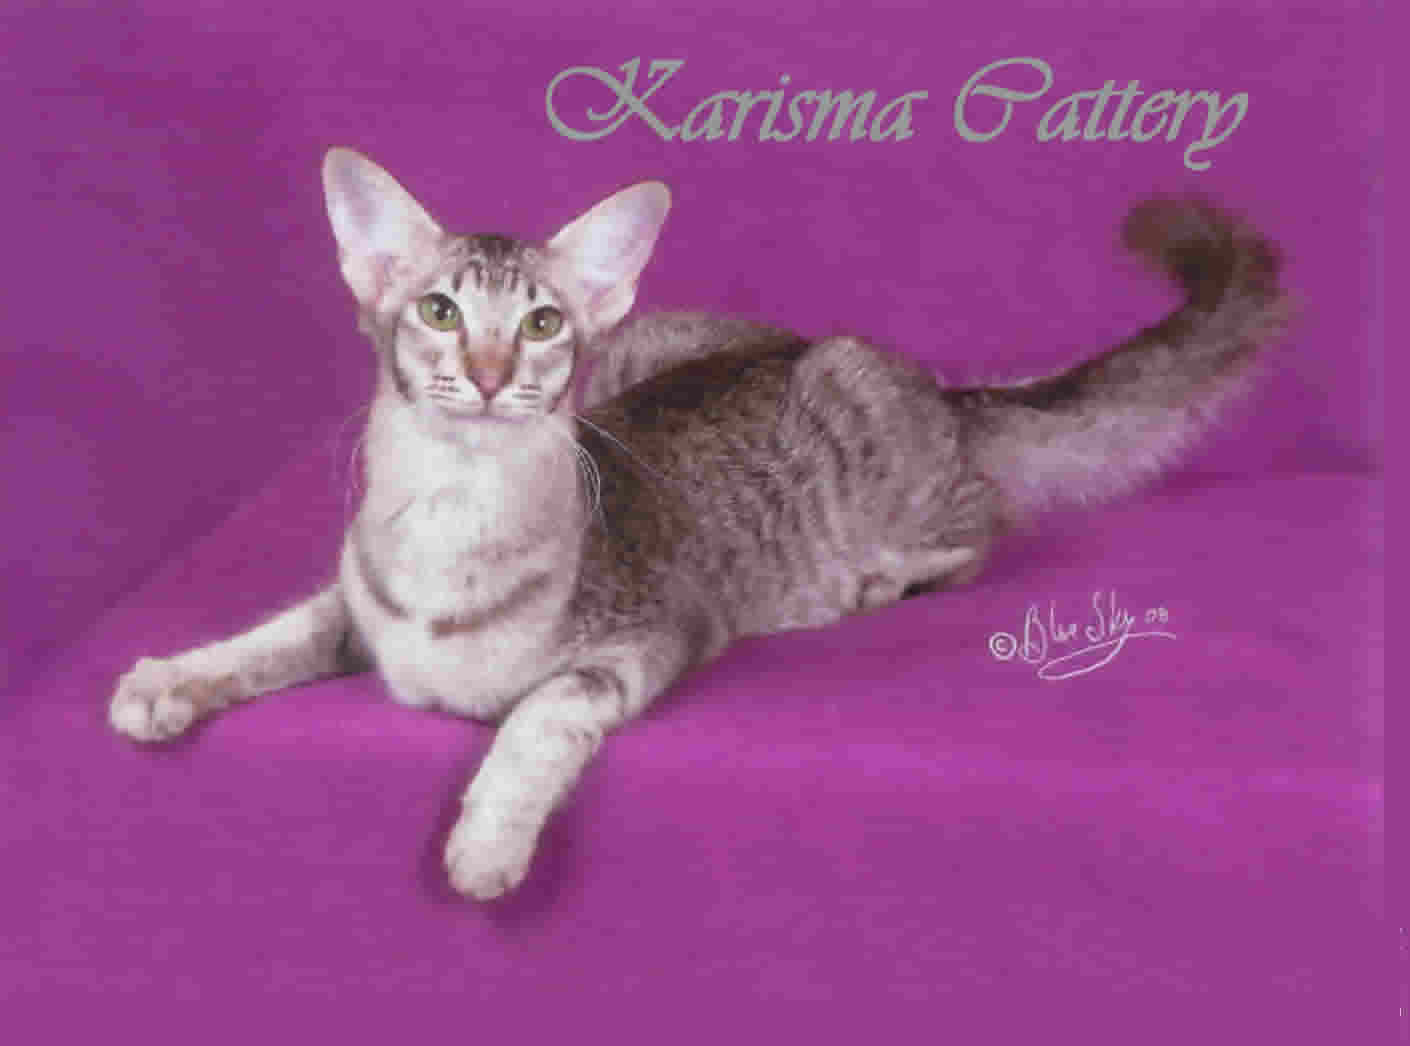 Chatterie Karisma Cattery